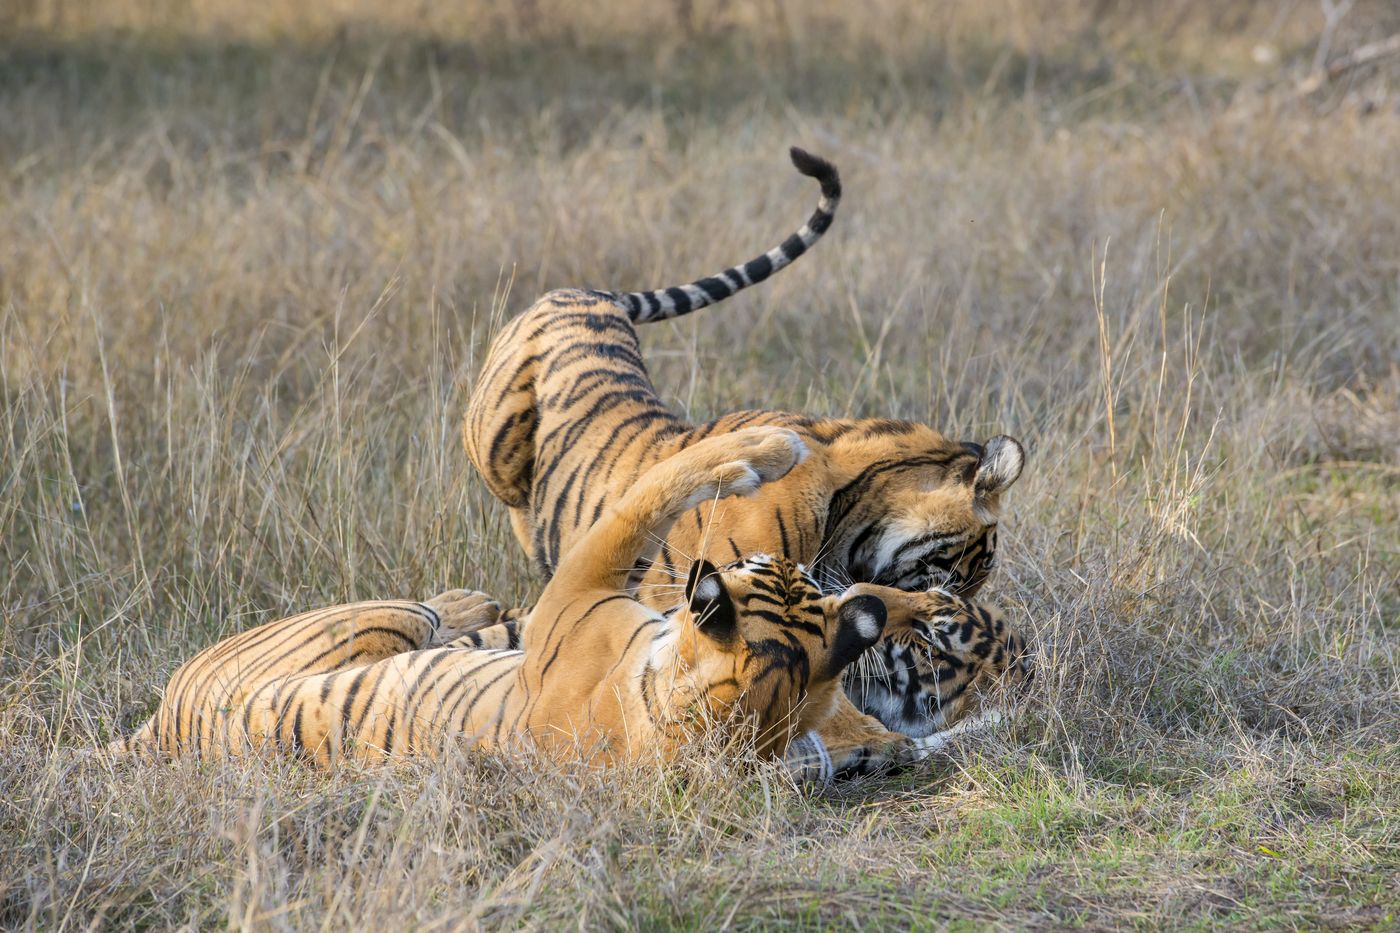 Young tigers learning how to behave through play-fighting in the Ranthambore Tiger Reserve